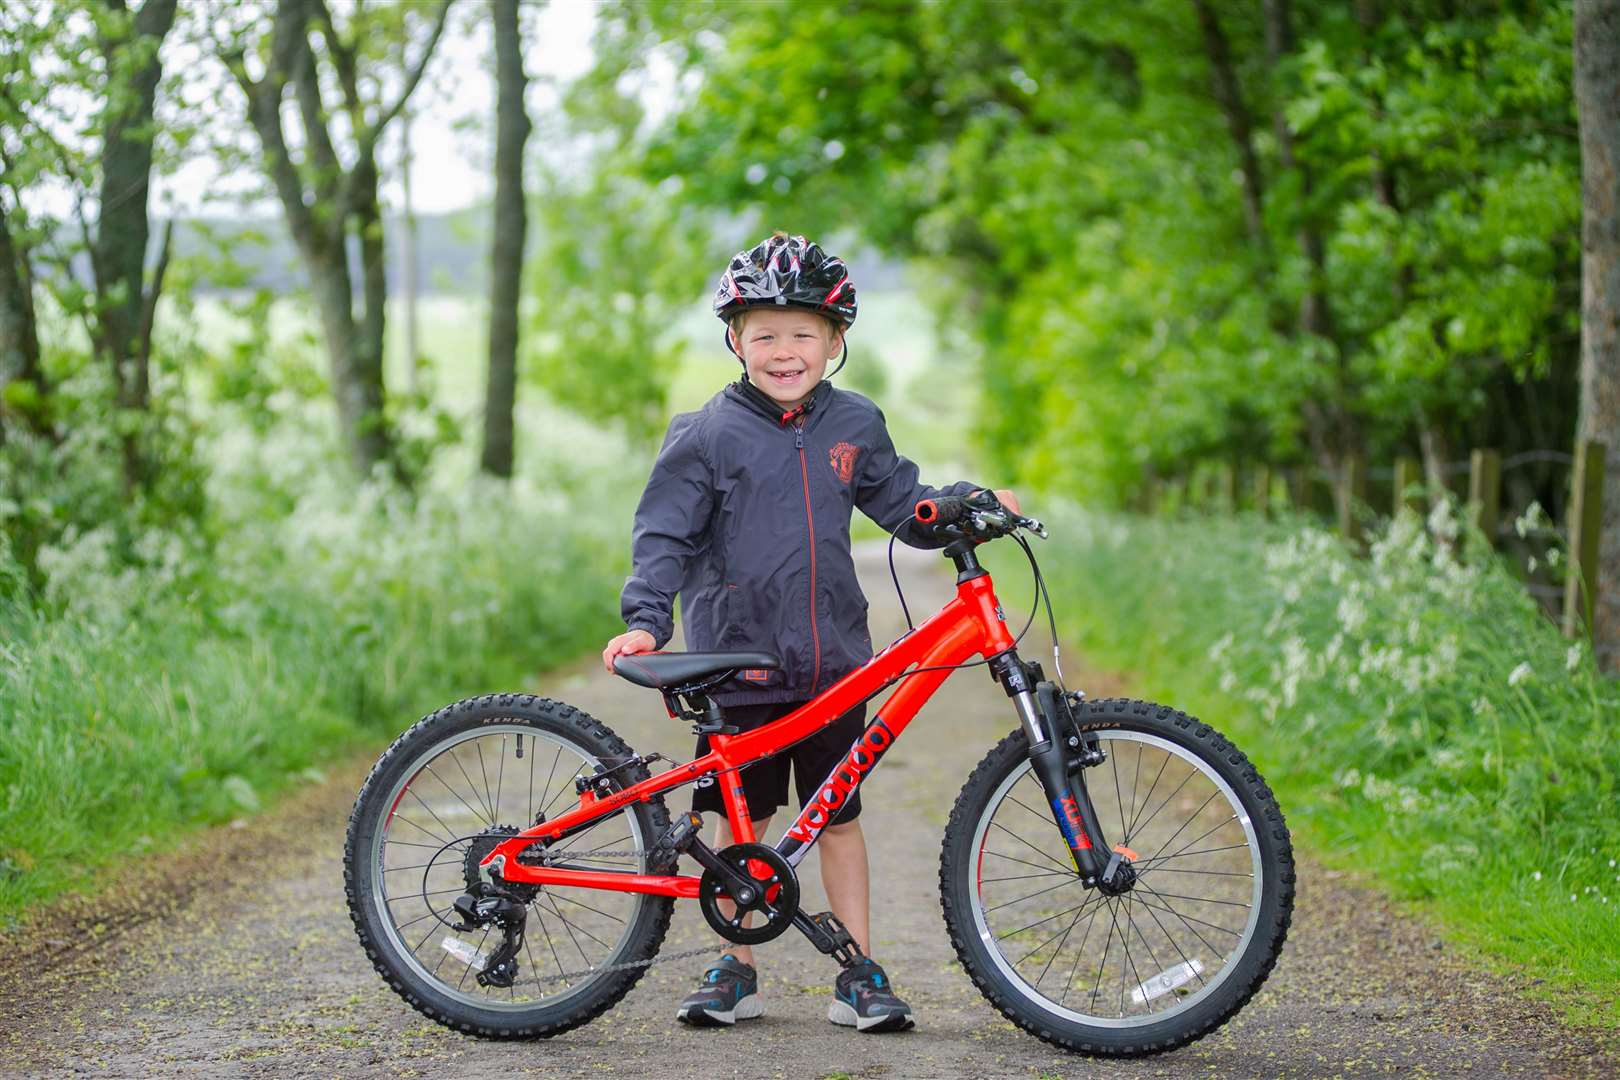 Six-year-old Lewis Mackay, from Keith, aims to cycle 100 miles throughout June for Breast Cancer Now. Picture: Daniel Forsyth.